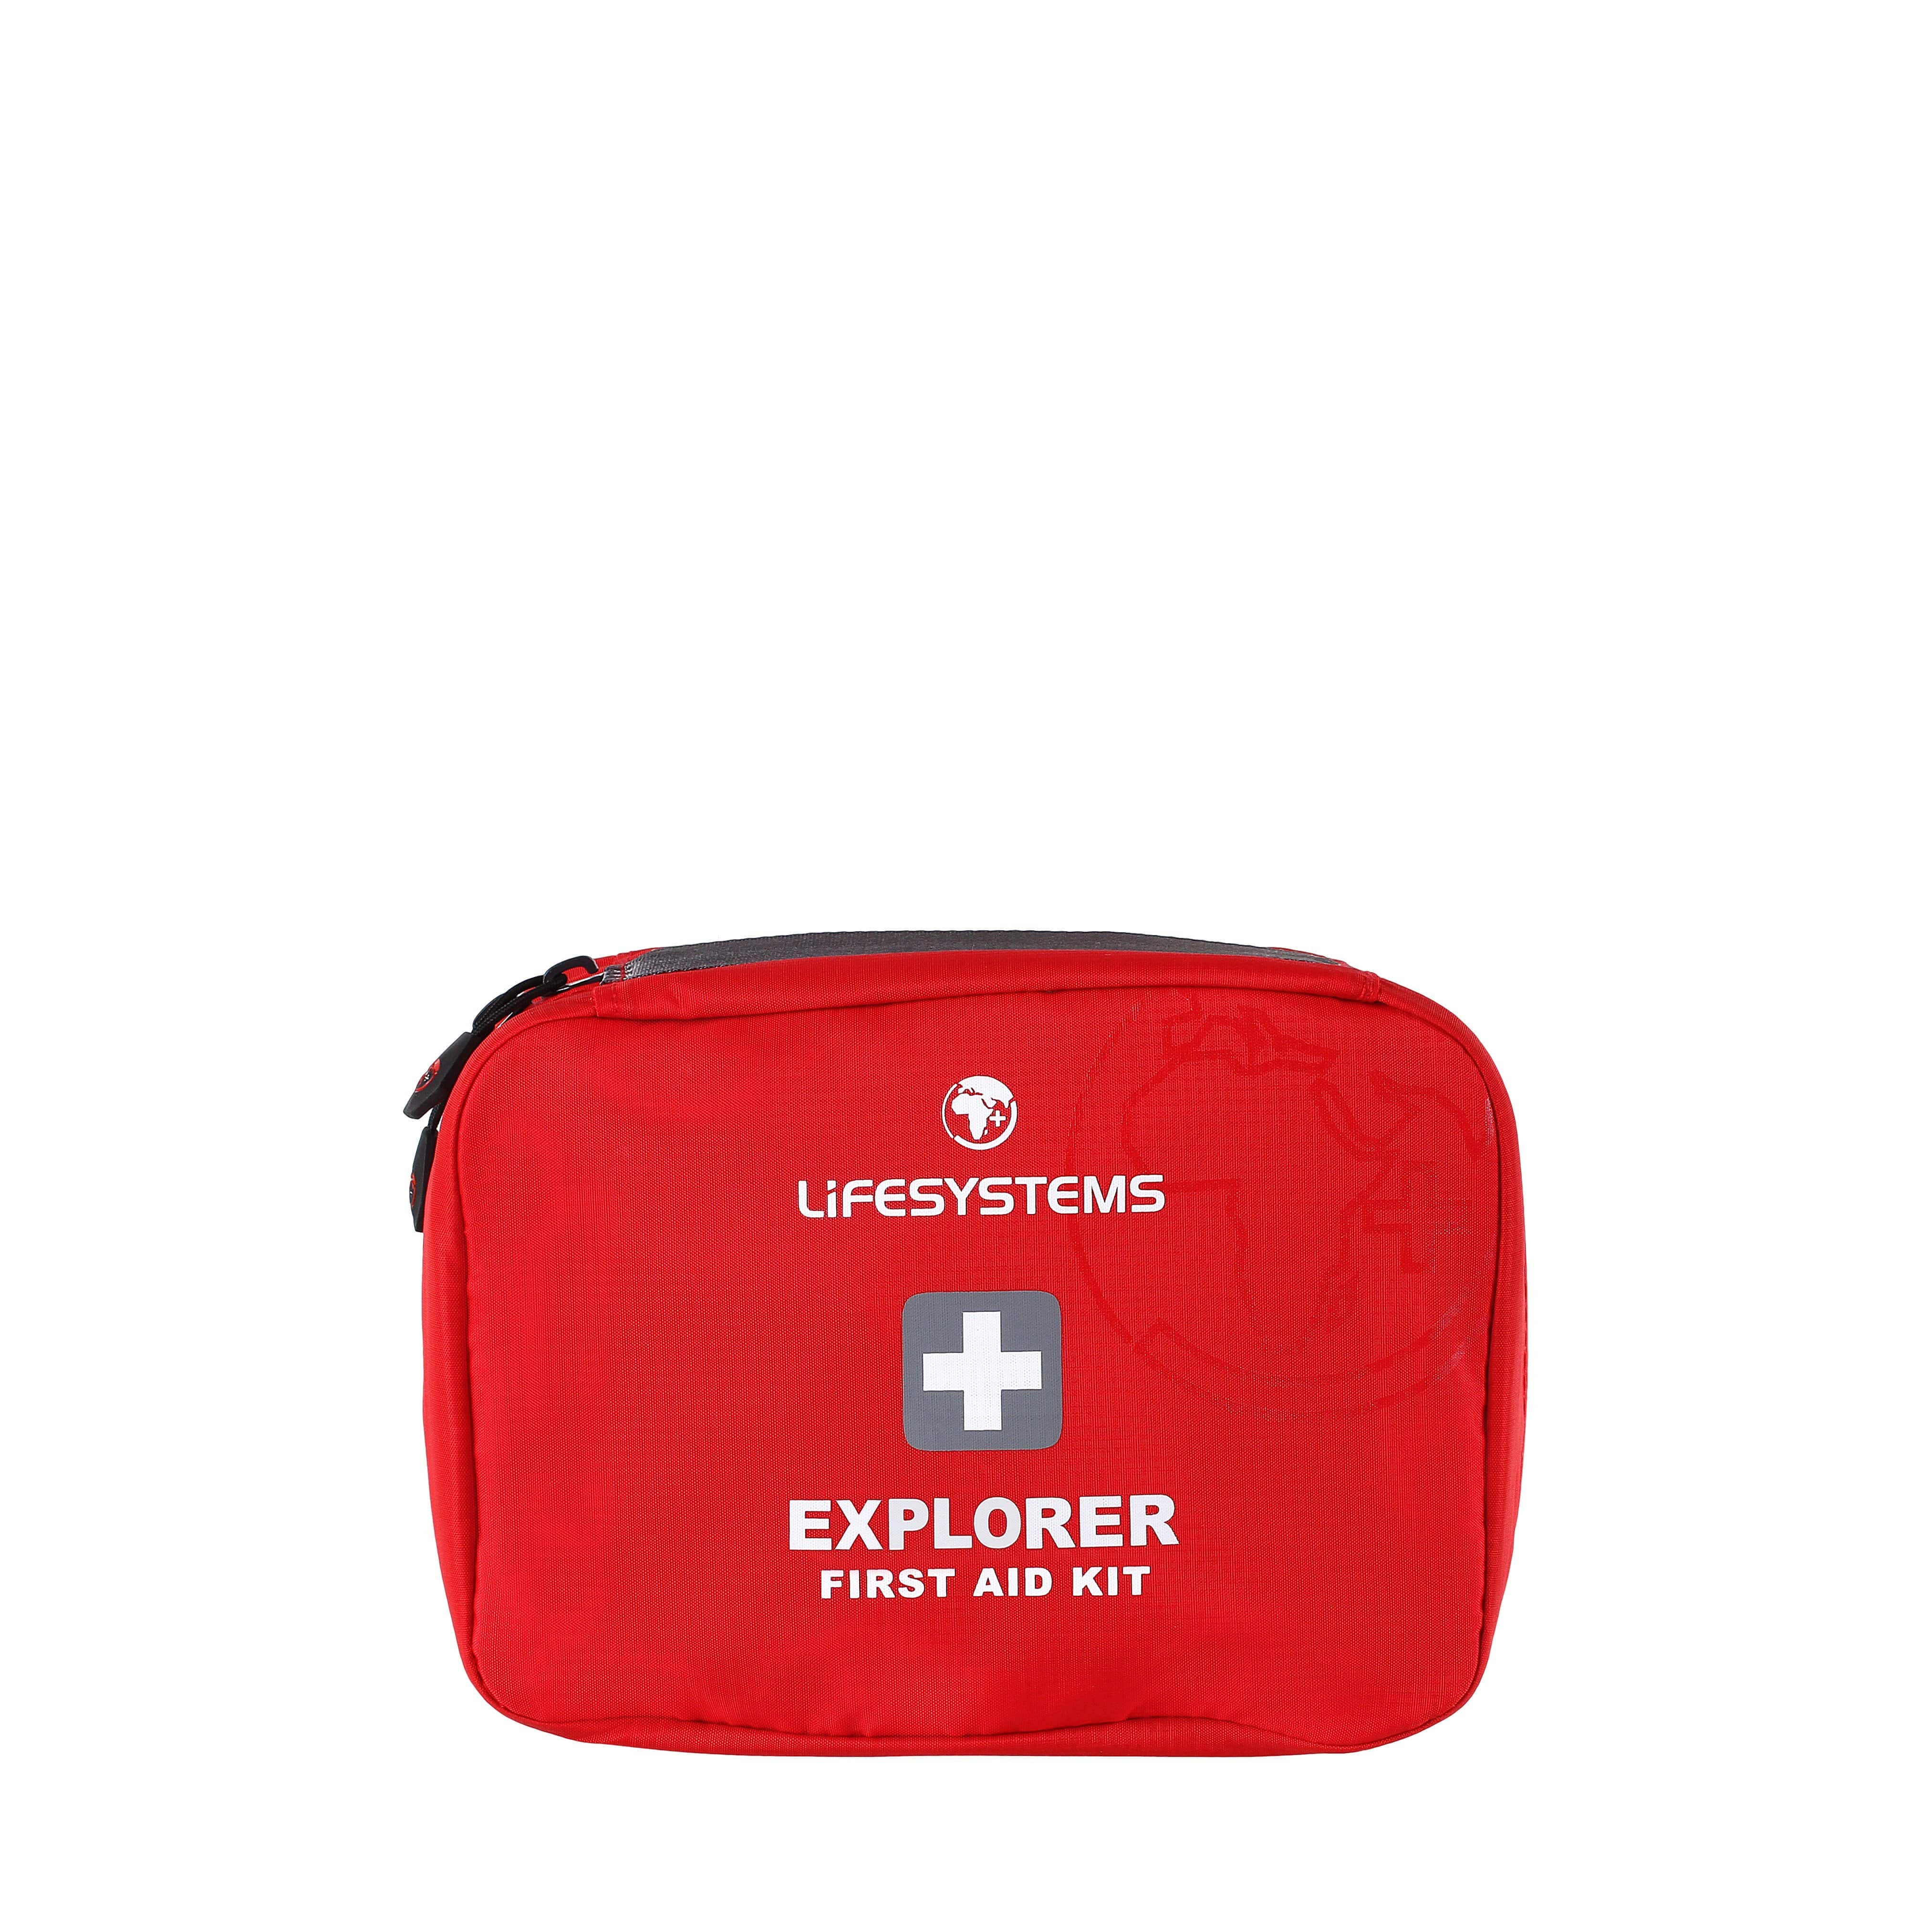 Life Systems Explorer First Aid Kit | LIFESYSTEMS | Portwest